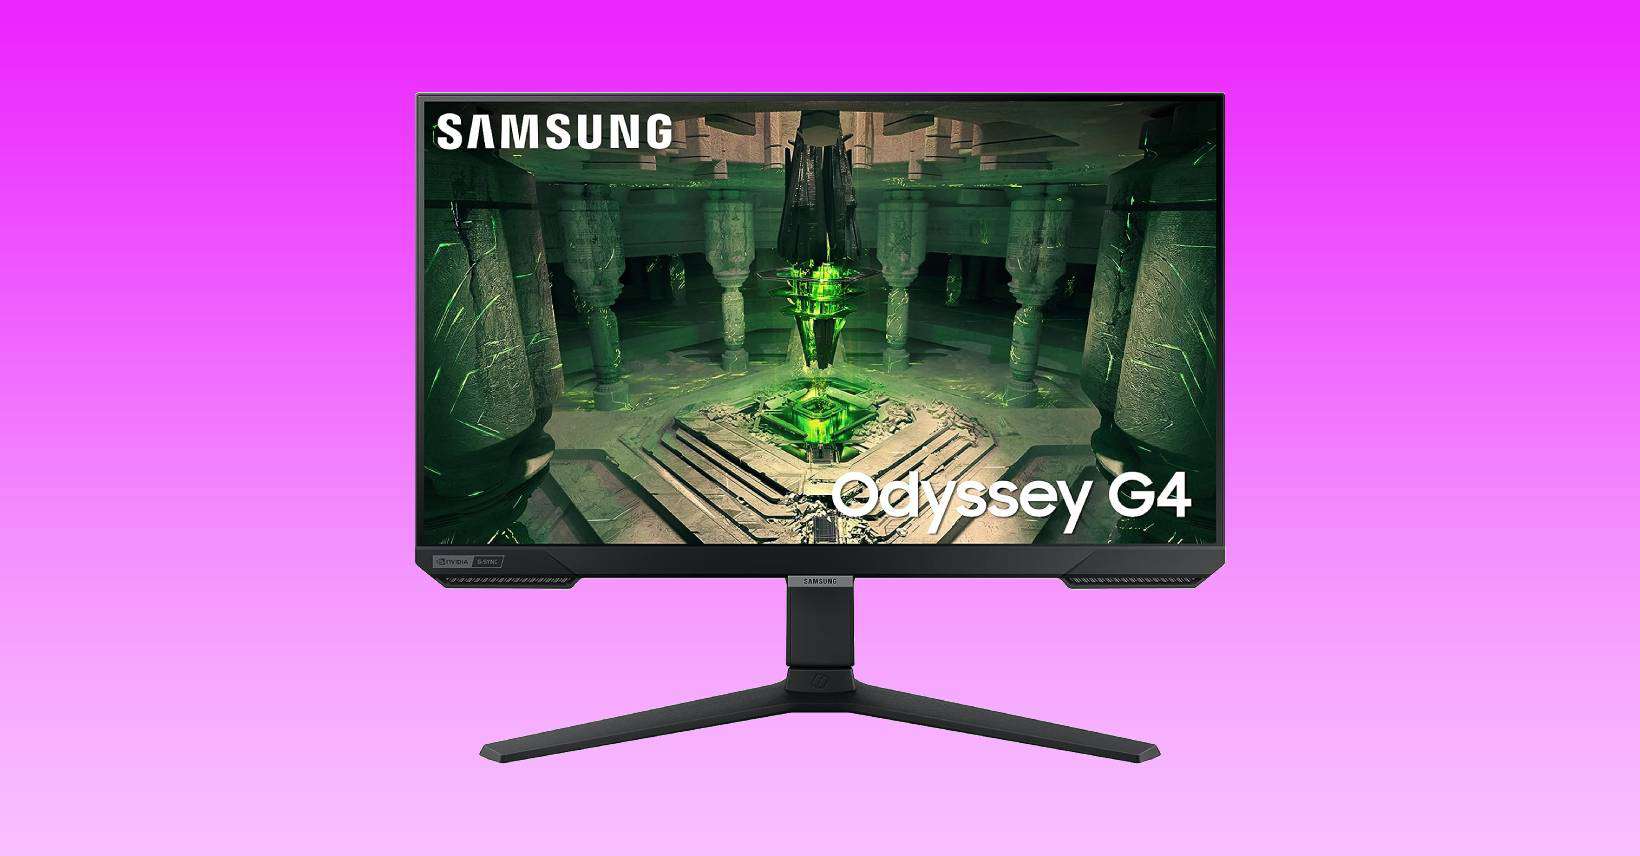 There’s a big deal on one of Samsung’s best 240hz monitors you won’t want to miss